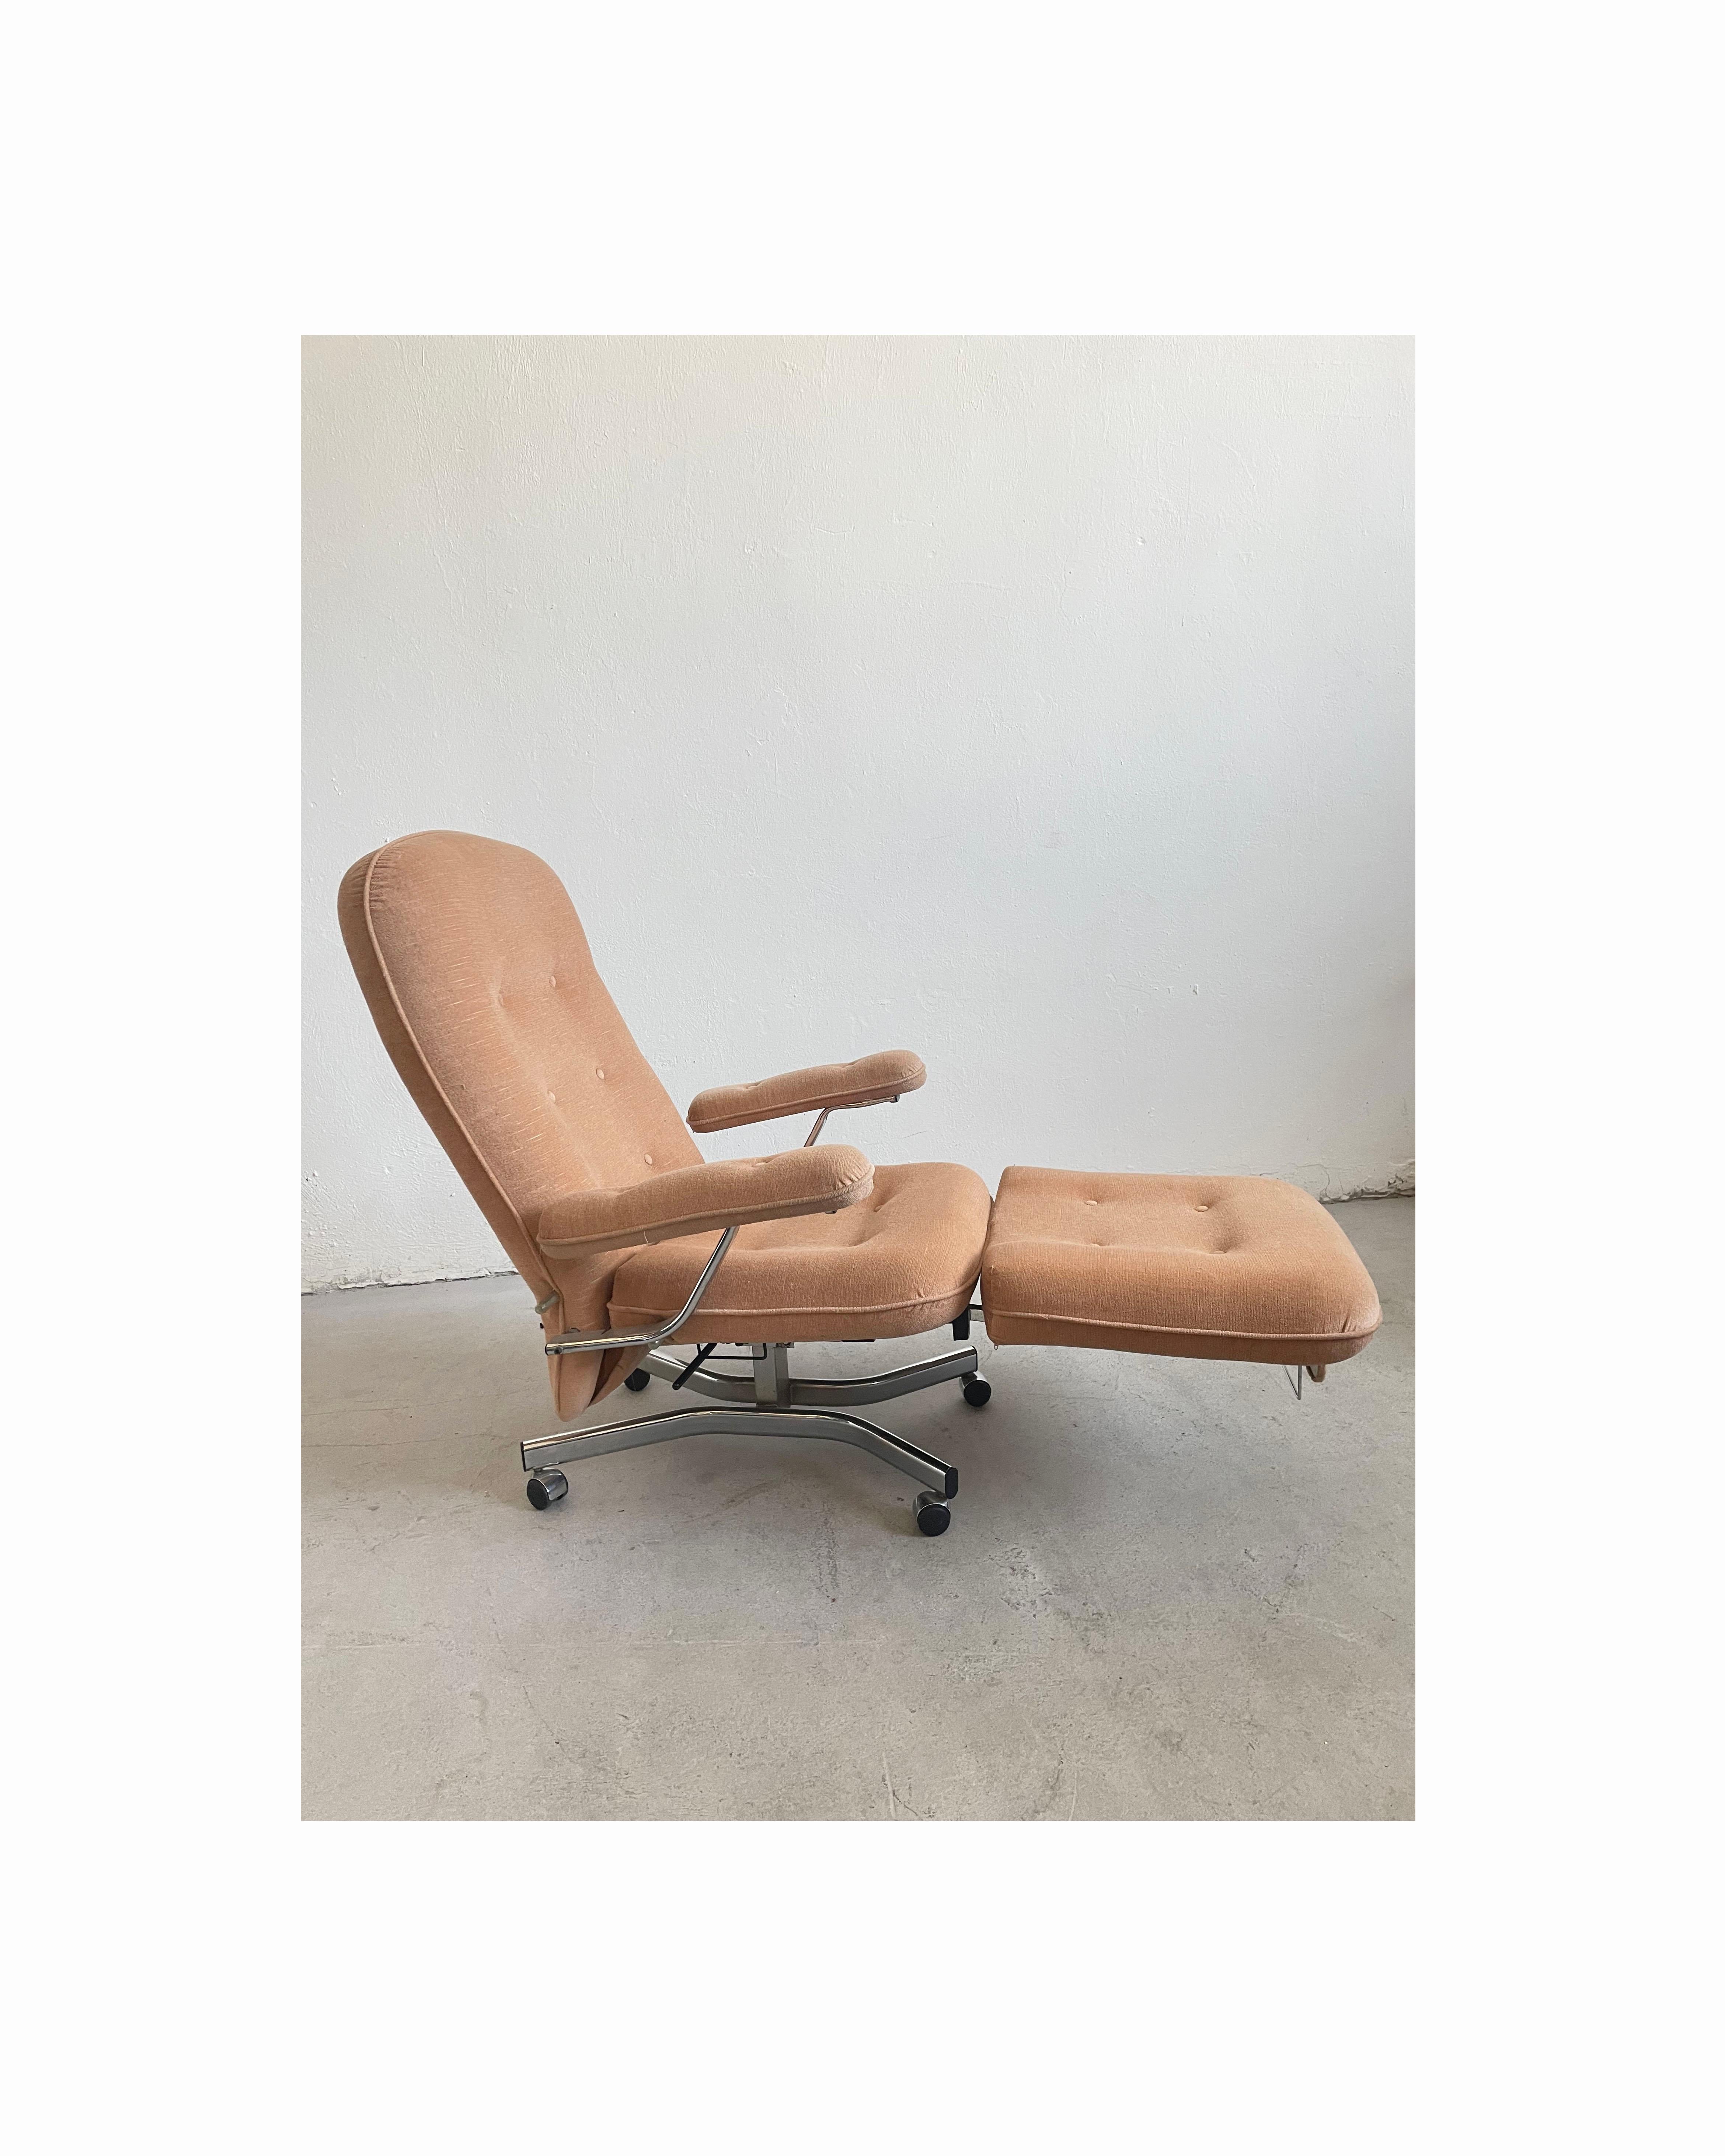 Vintage Everstyl Armchair Convertible and Multi-functional Recliner France 1970s For Sale 1